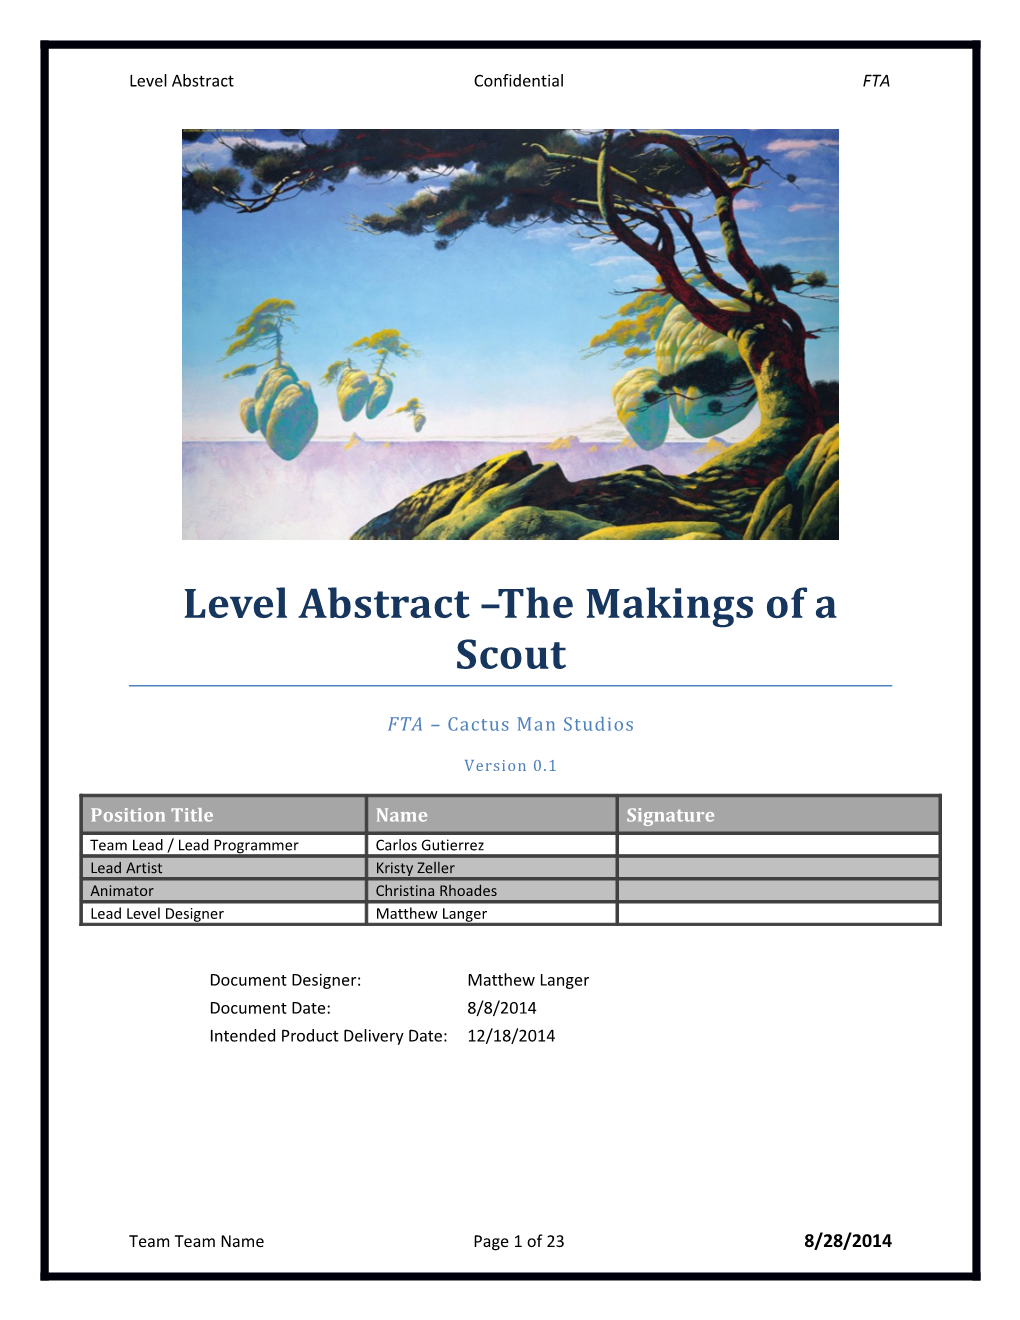 Levelabstract the Makings of a Scout